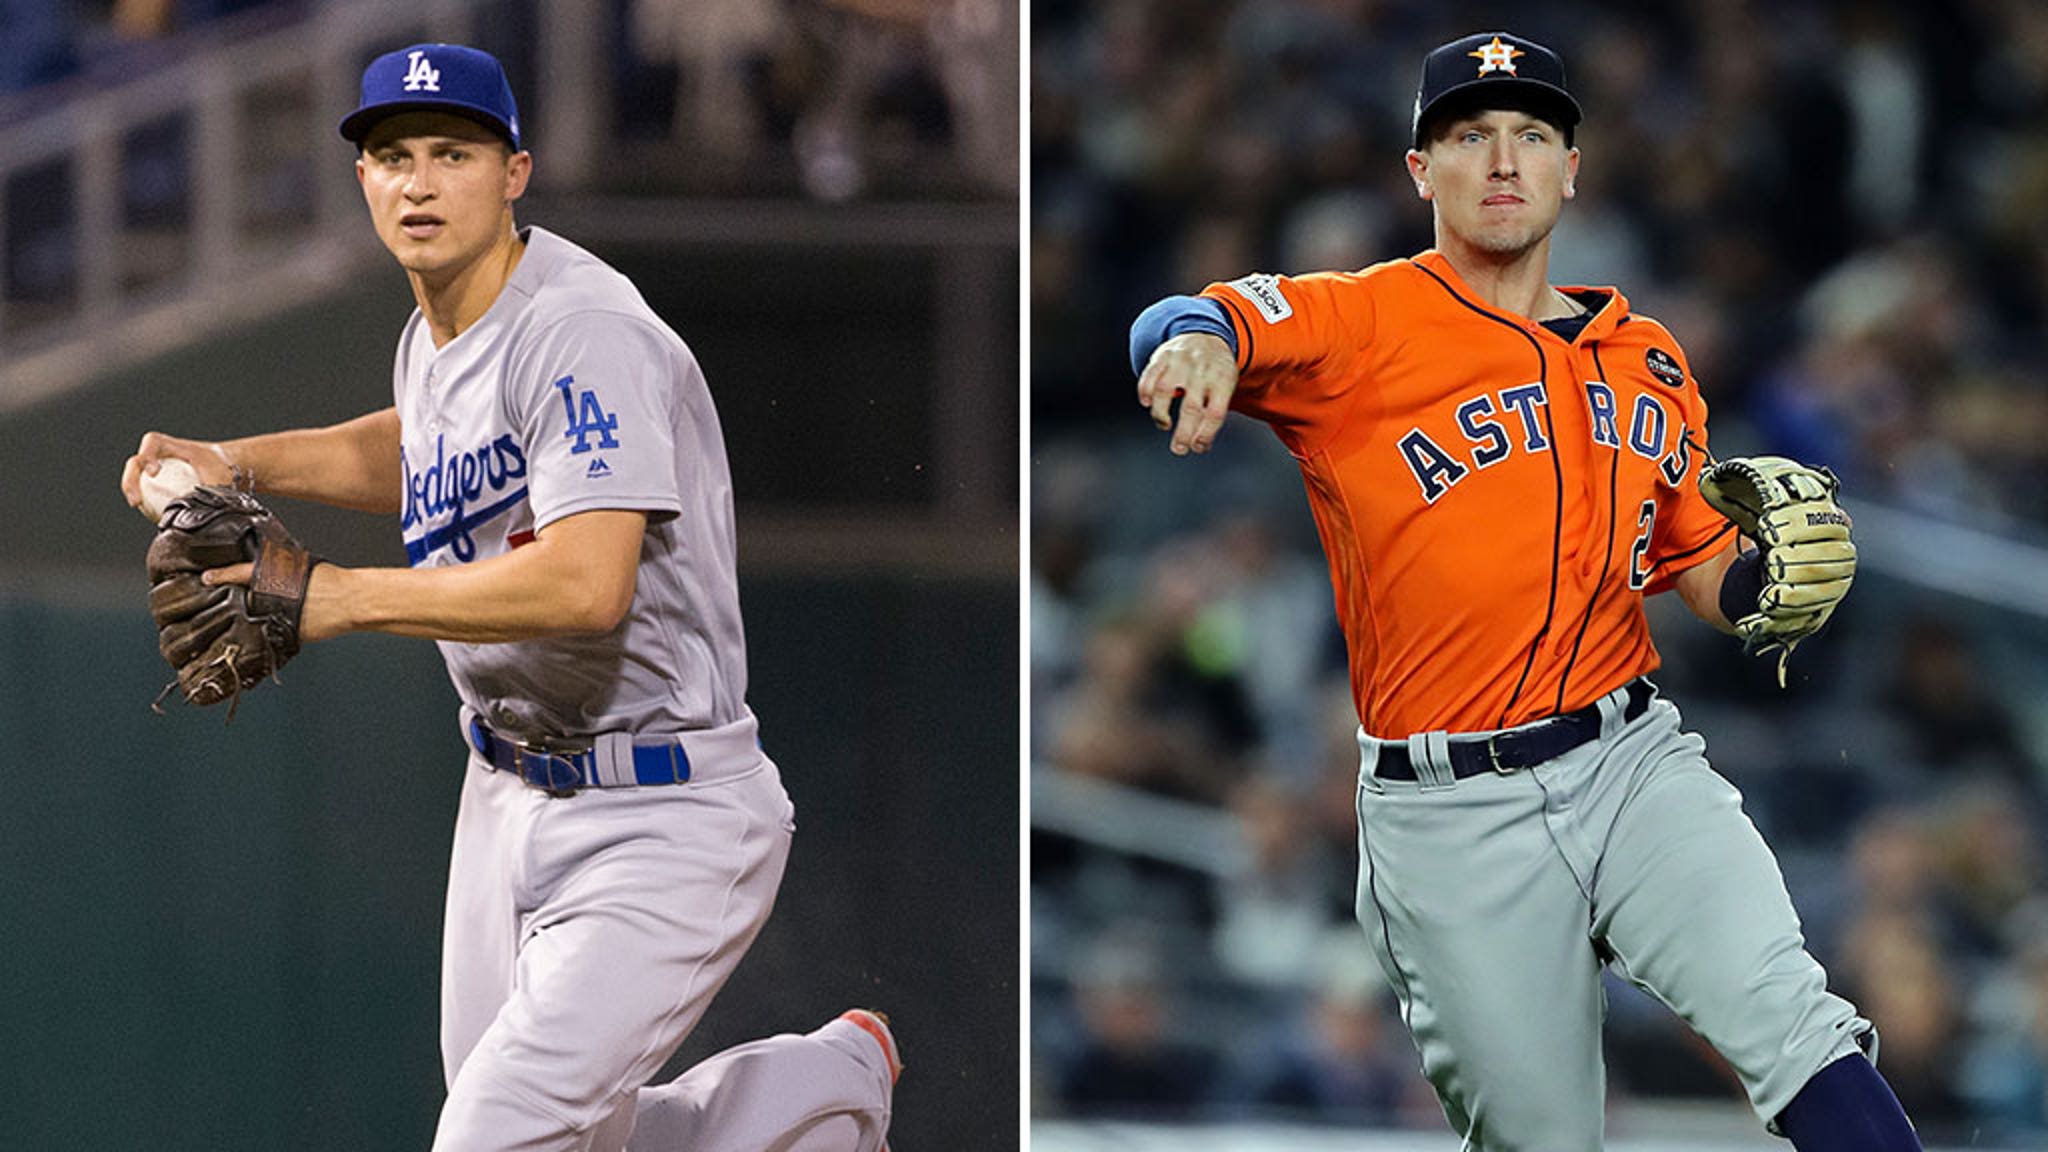 Dodgers vs. Astros -- Who'd You Rather? (World Series Edition)